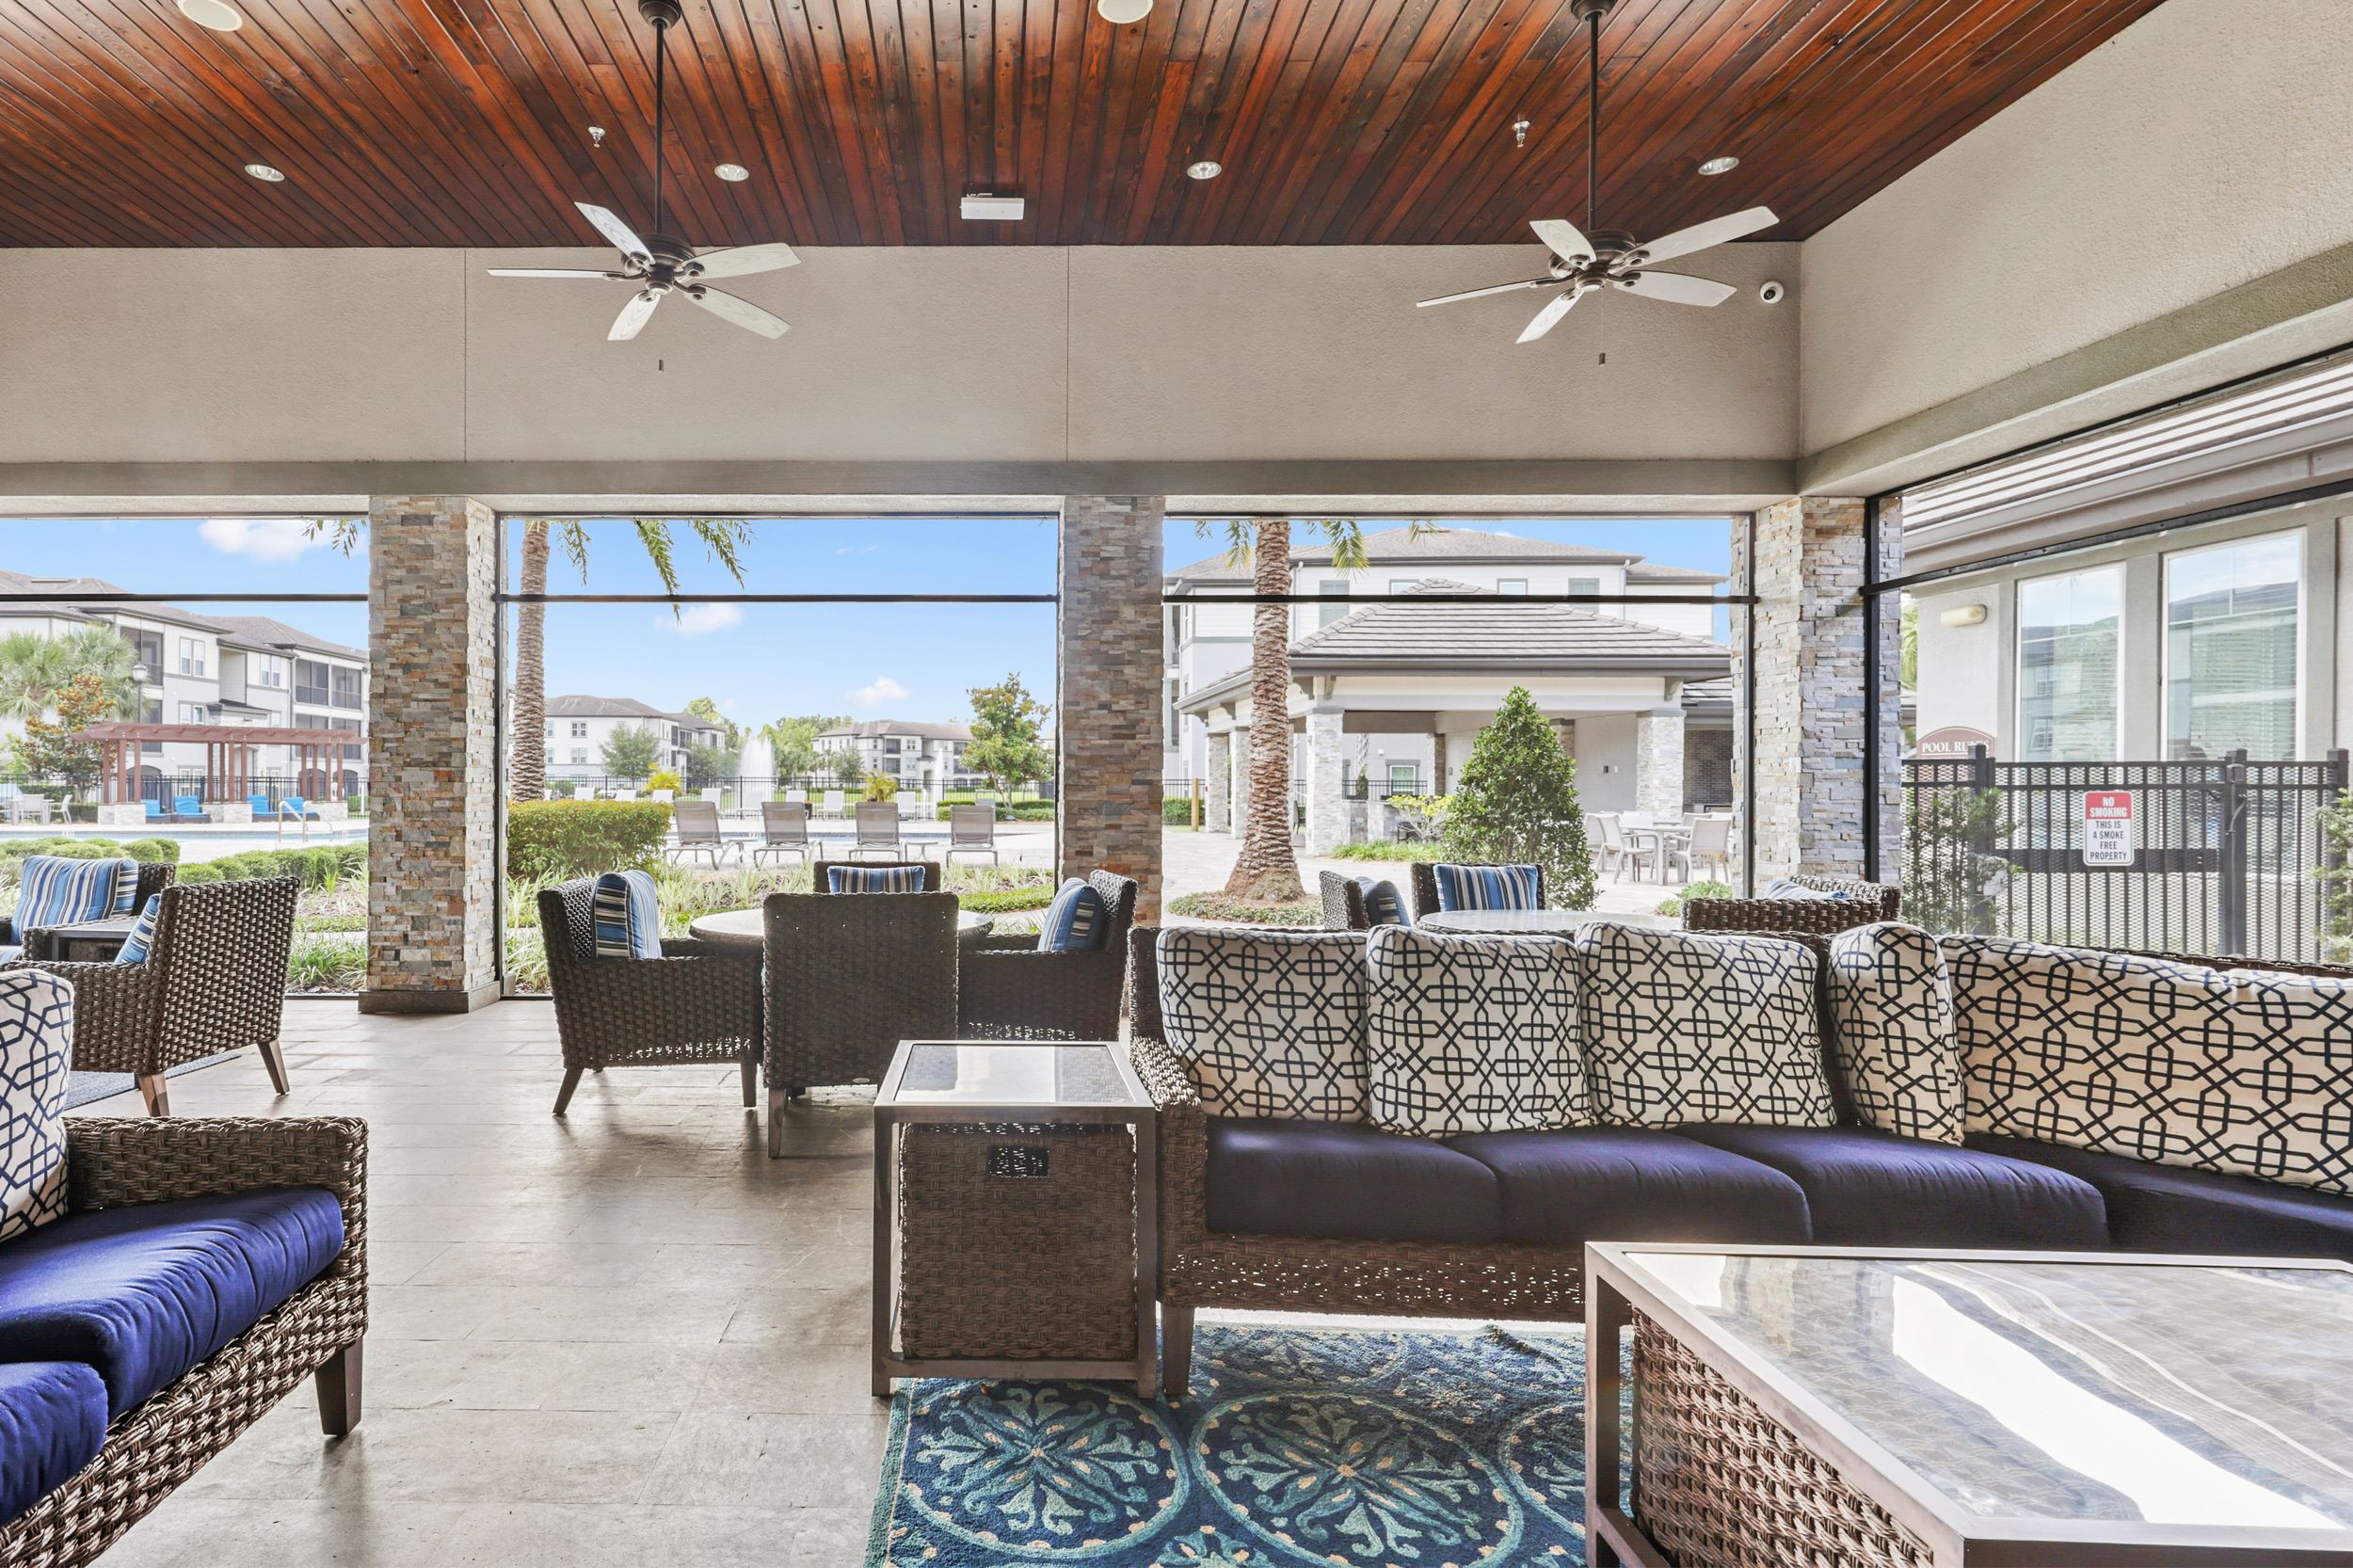 Spacious, covered veranda with natural sunlight, a fireplace, and stylish furniture at Lantower Grande Pines.